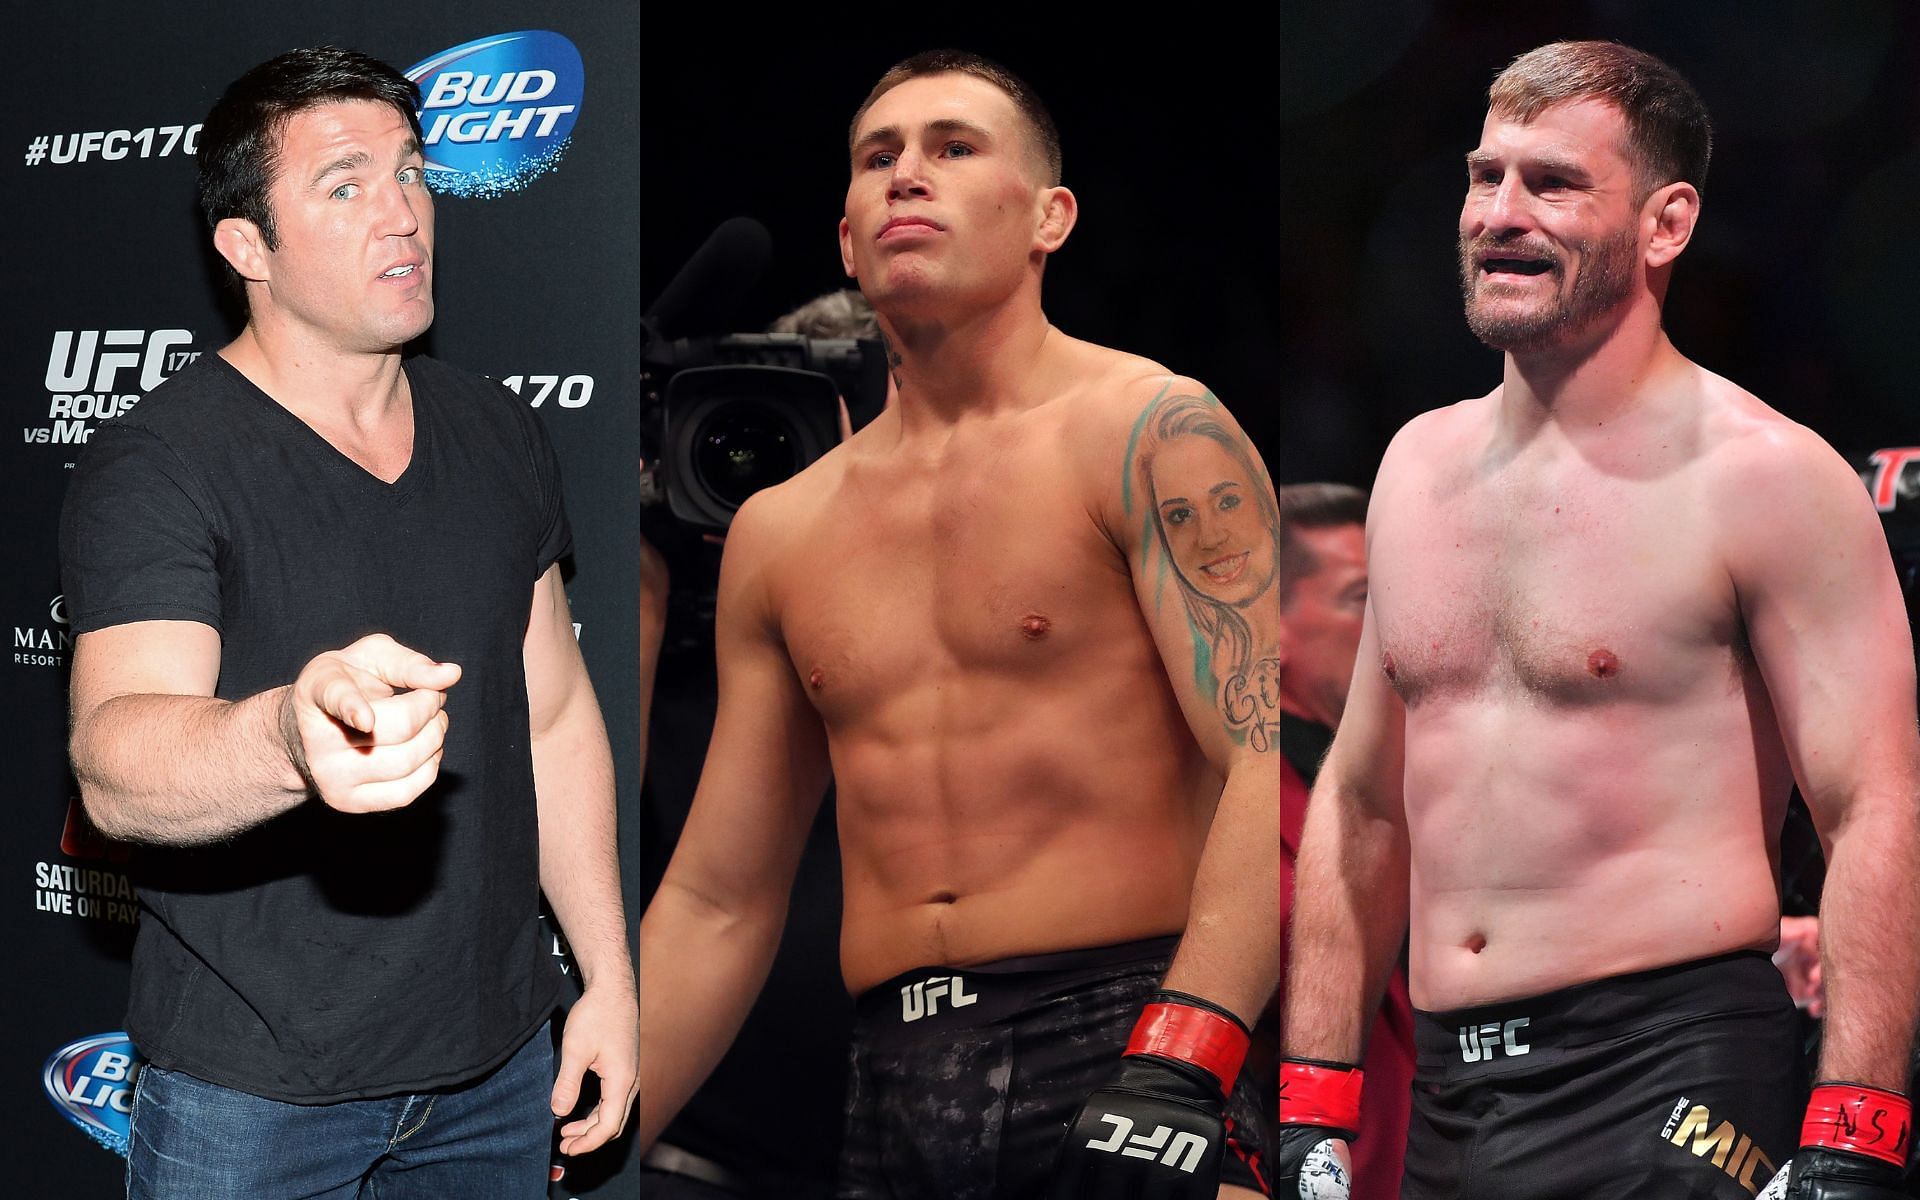 Chael Sonnen (Left), Darren Till (Middle), and Stipe Miocic (Right)